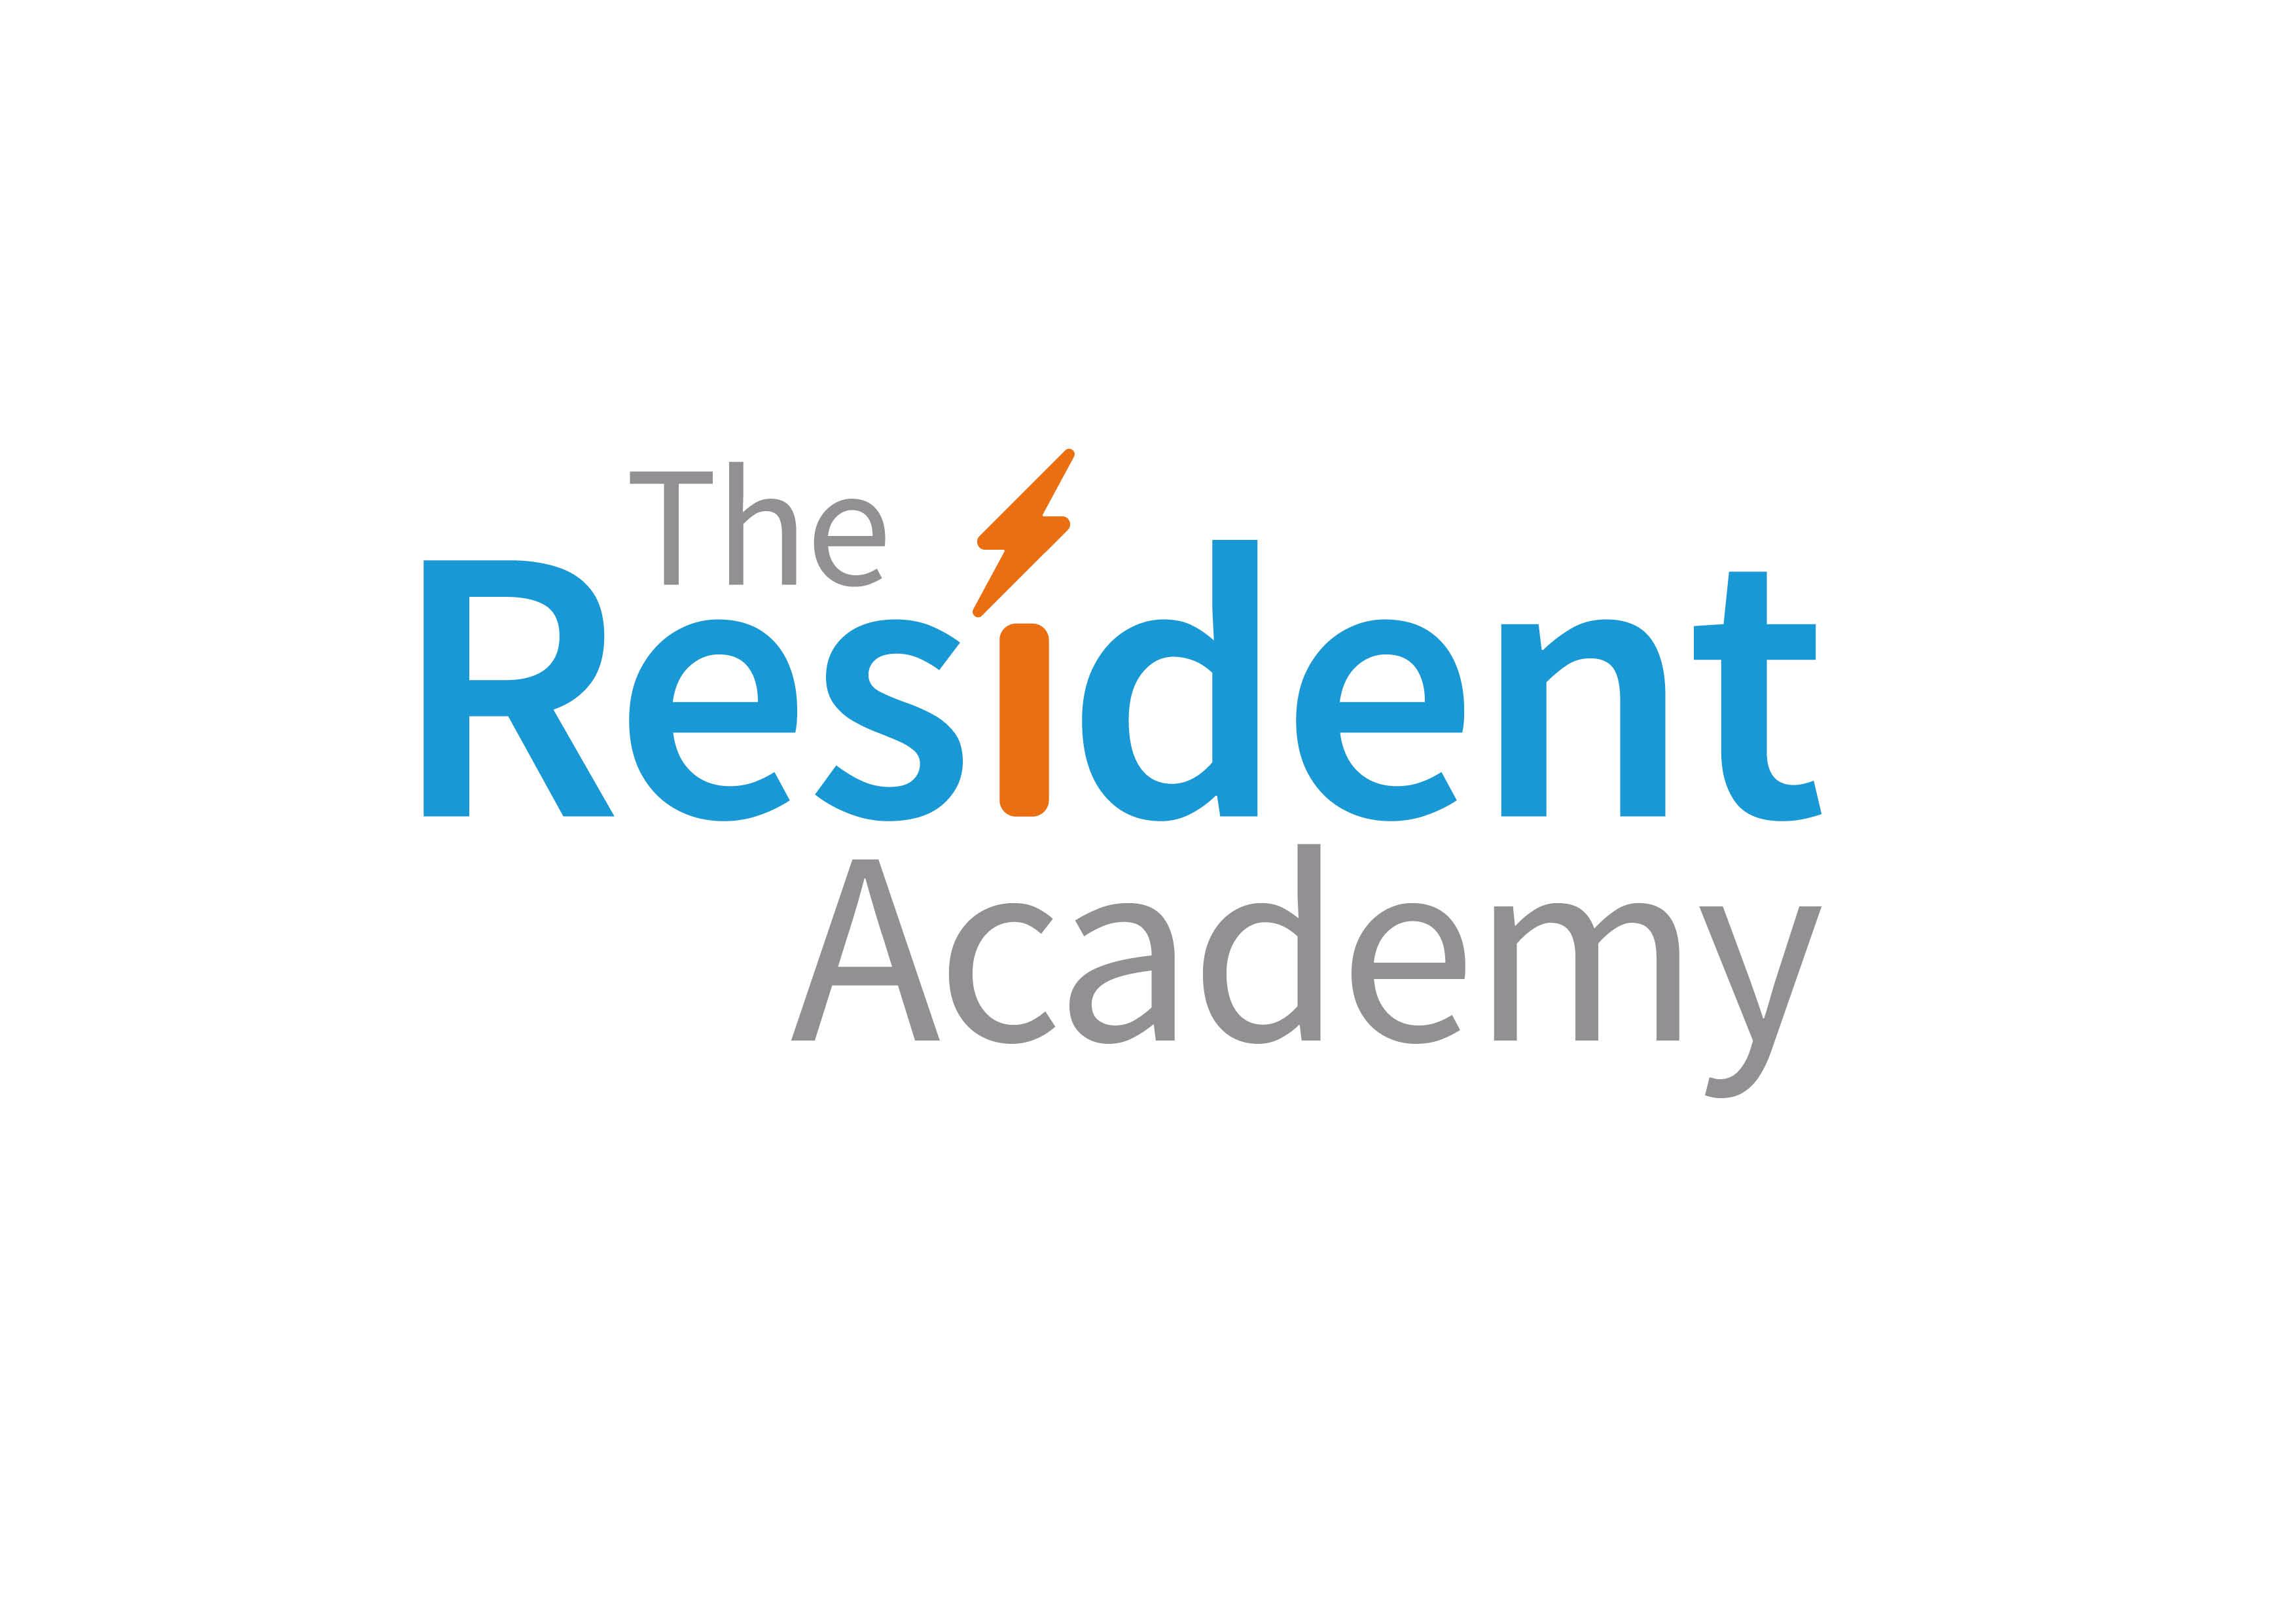 The Resident Academy